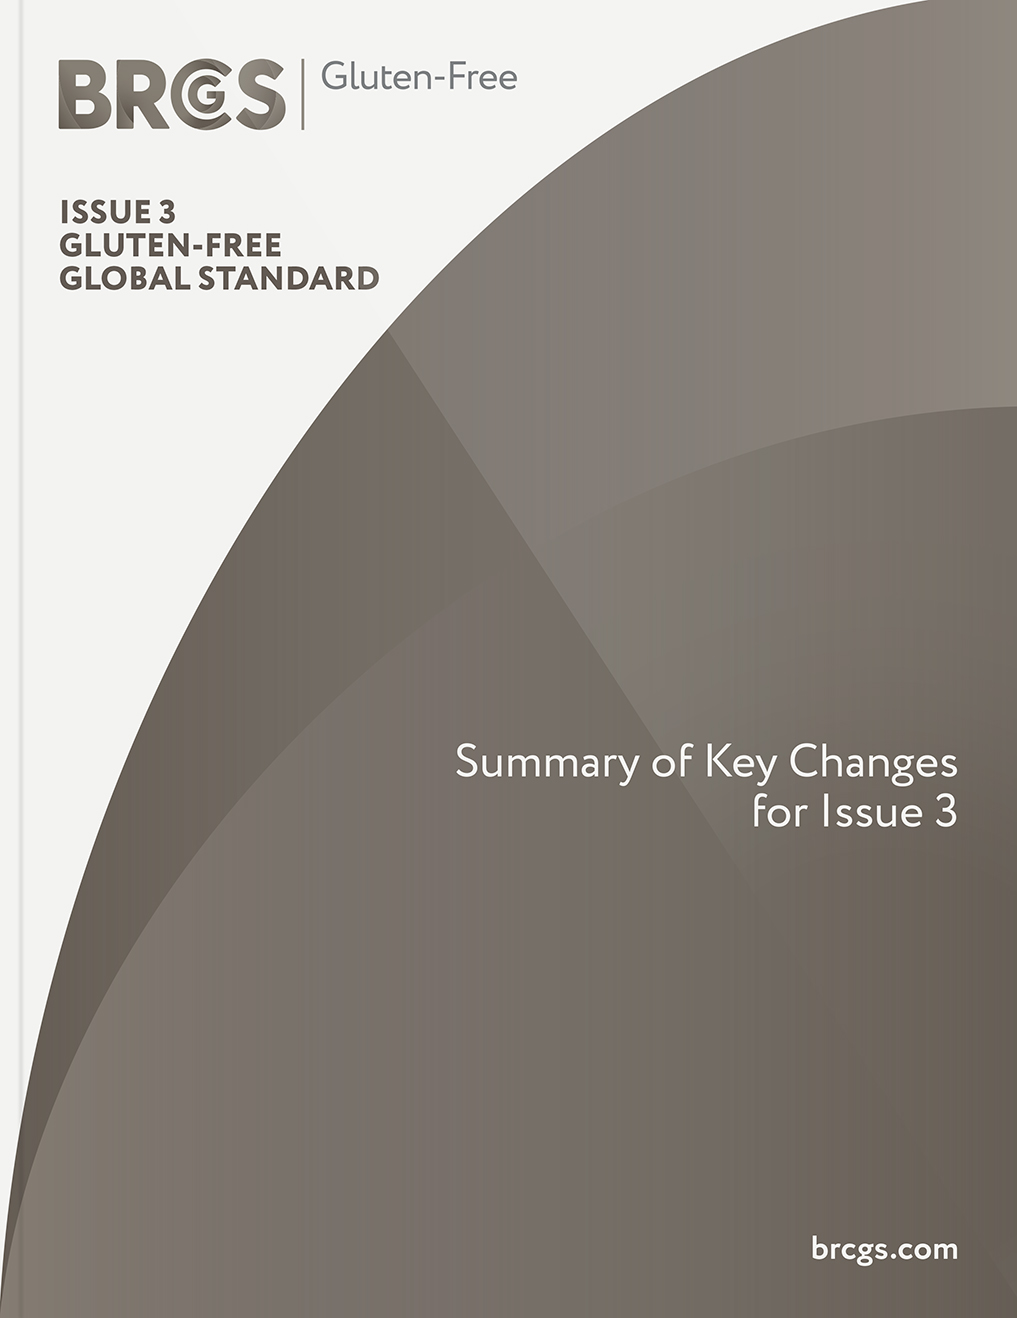 Gluten-Free Global Standard Issue 3 Summary of Key Changes